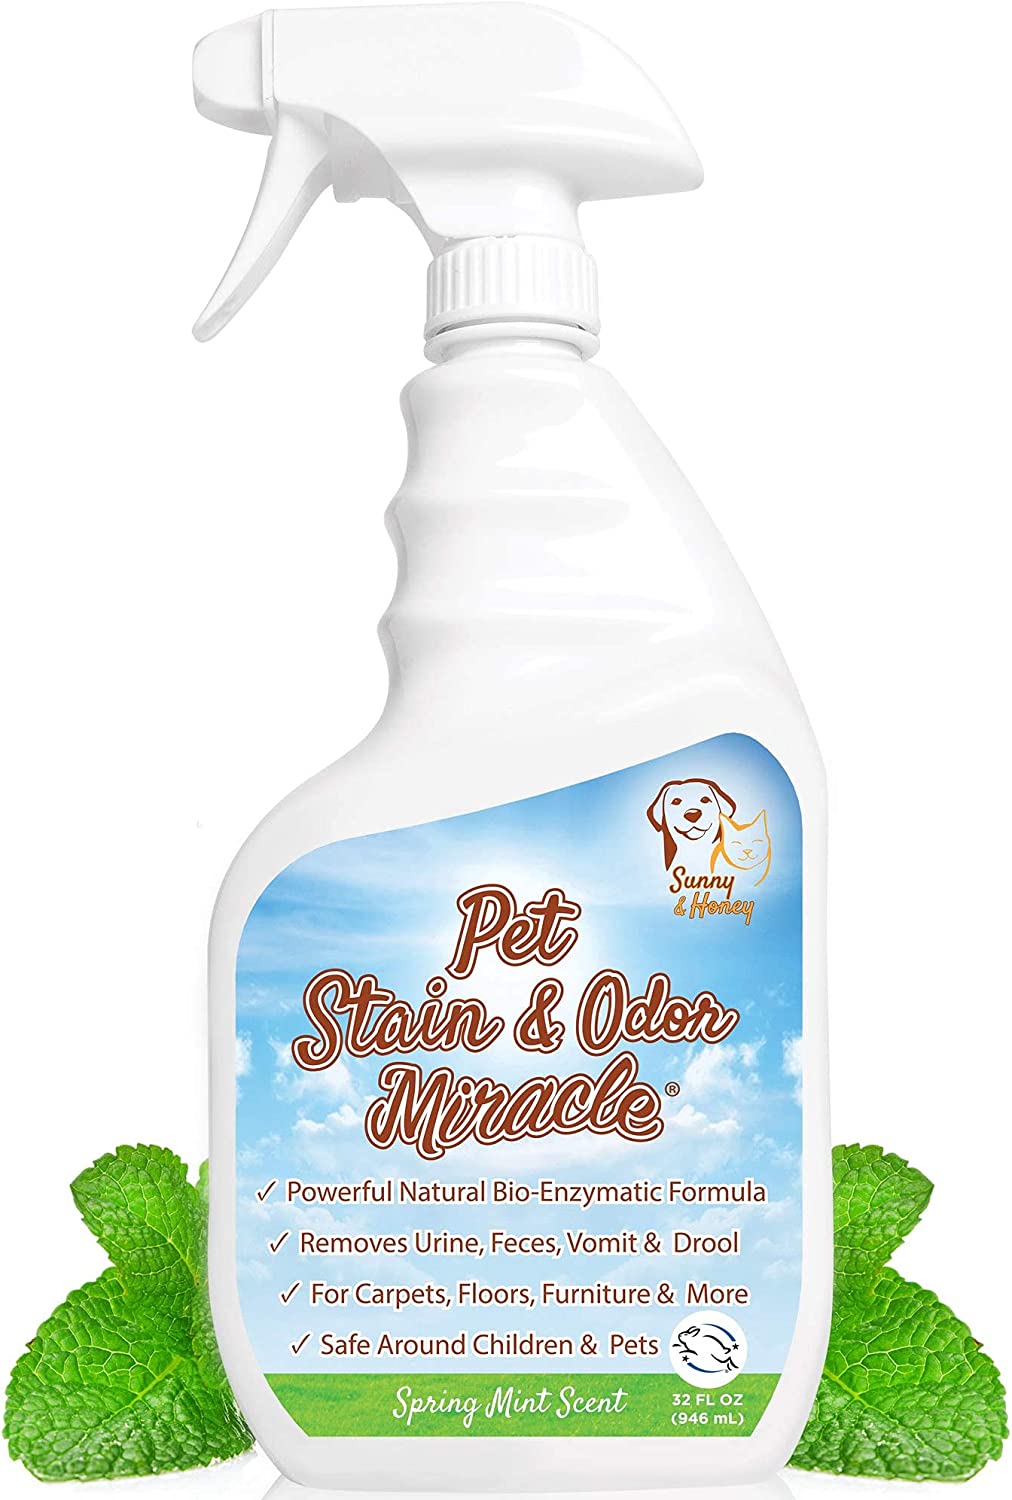 3. Sunny & Honey Pet Stain & Odor Miracle